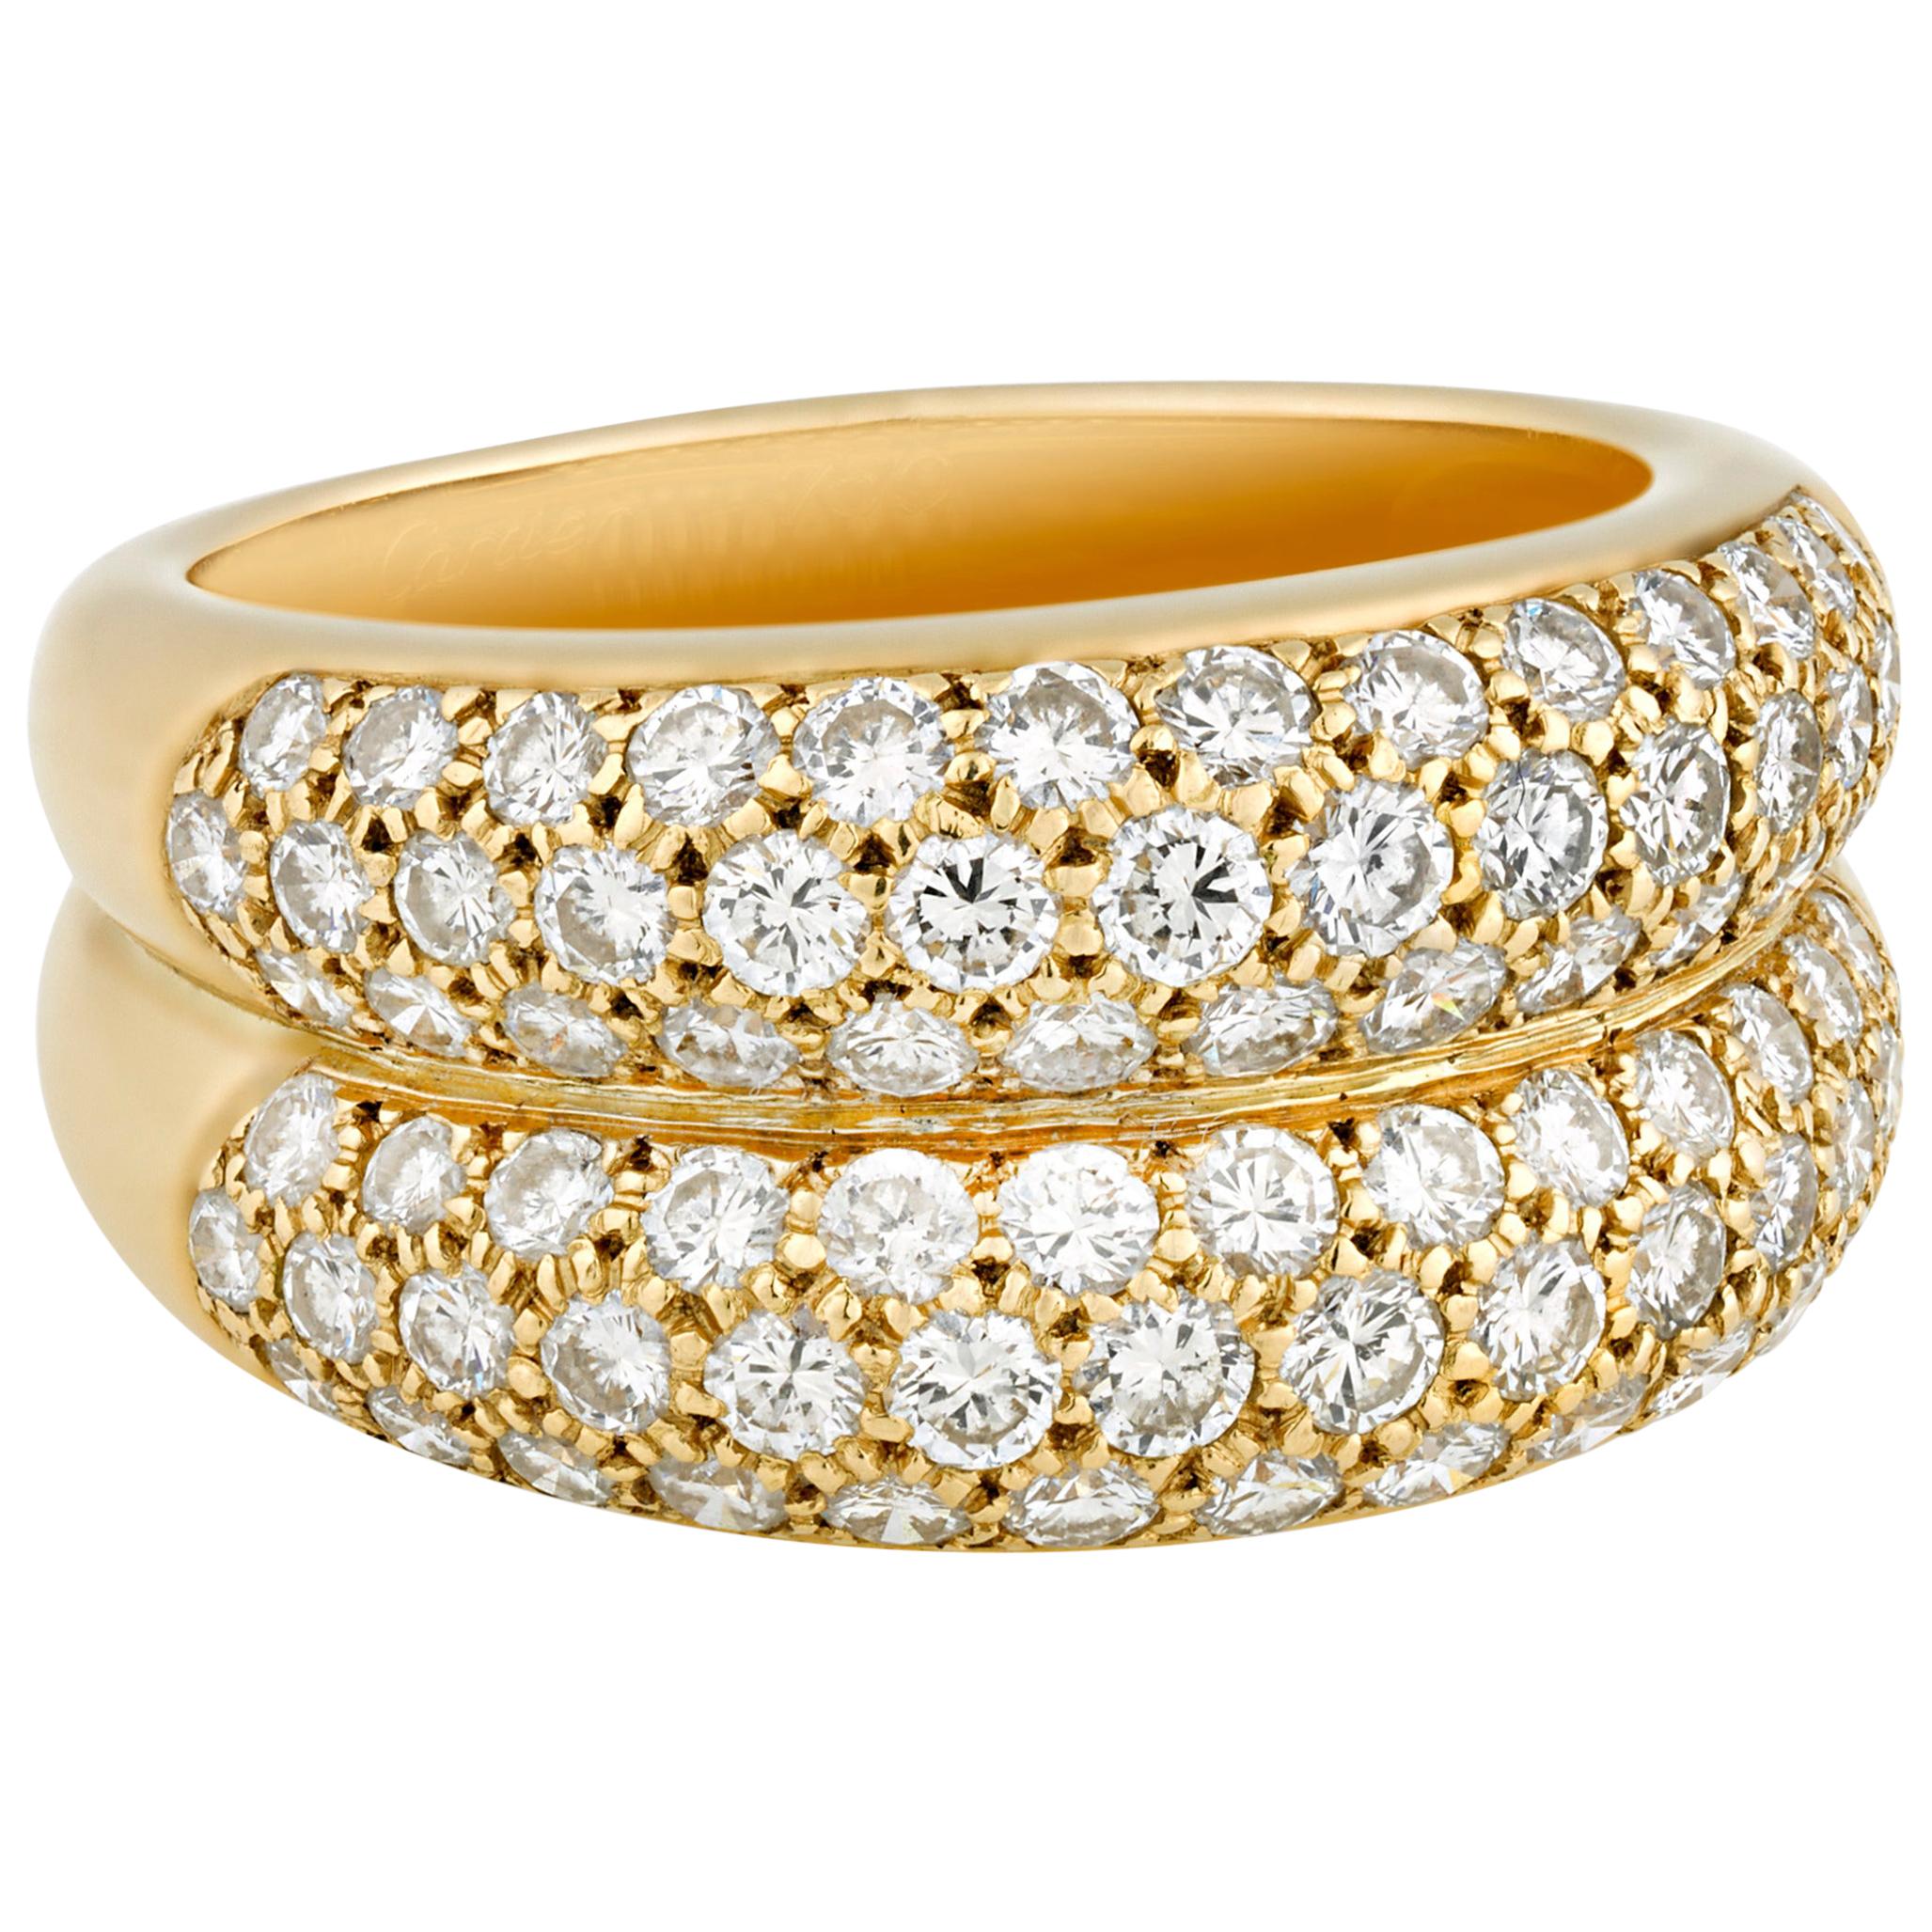 Diamond Bombe Ring by Cartier